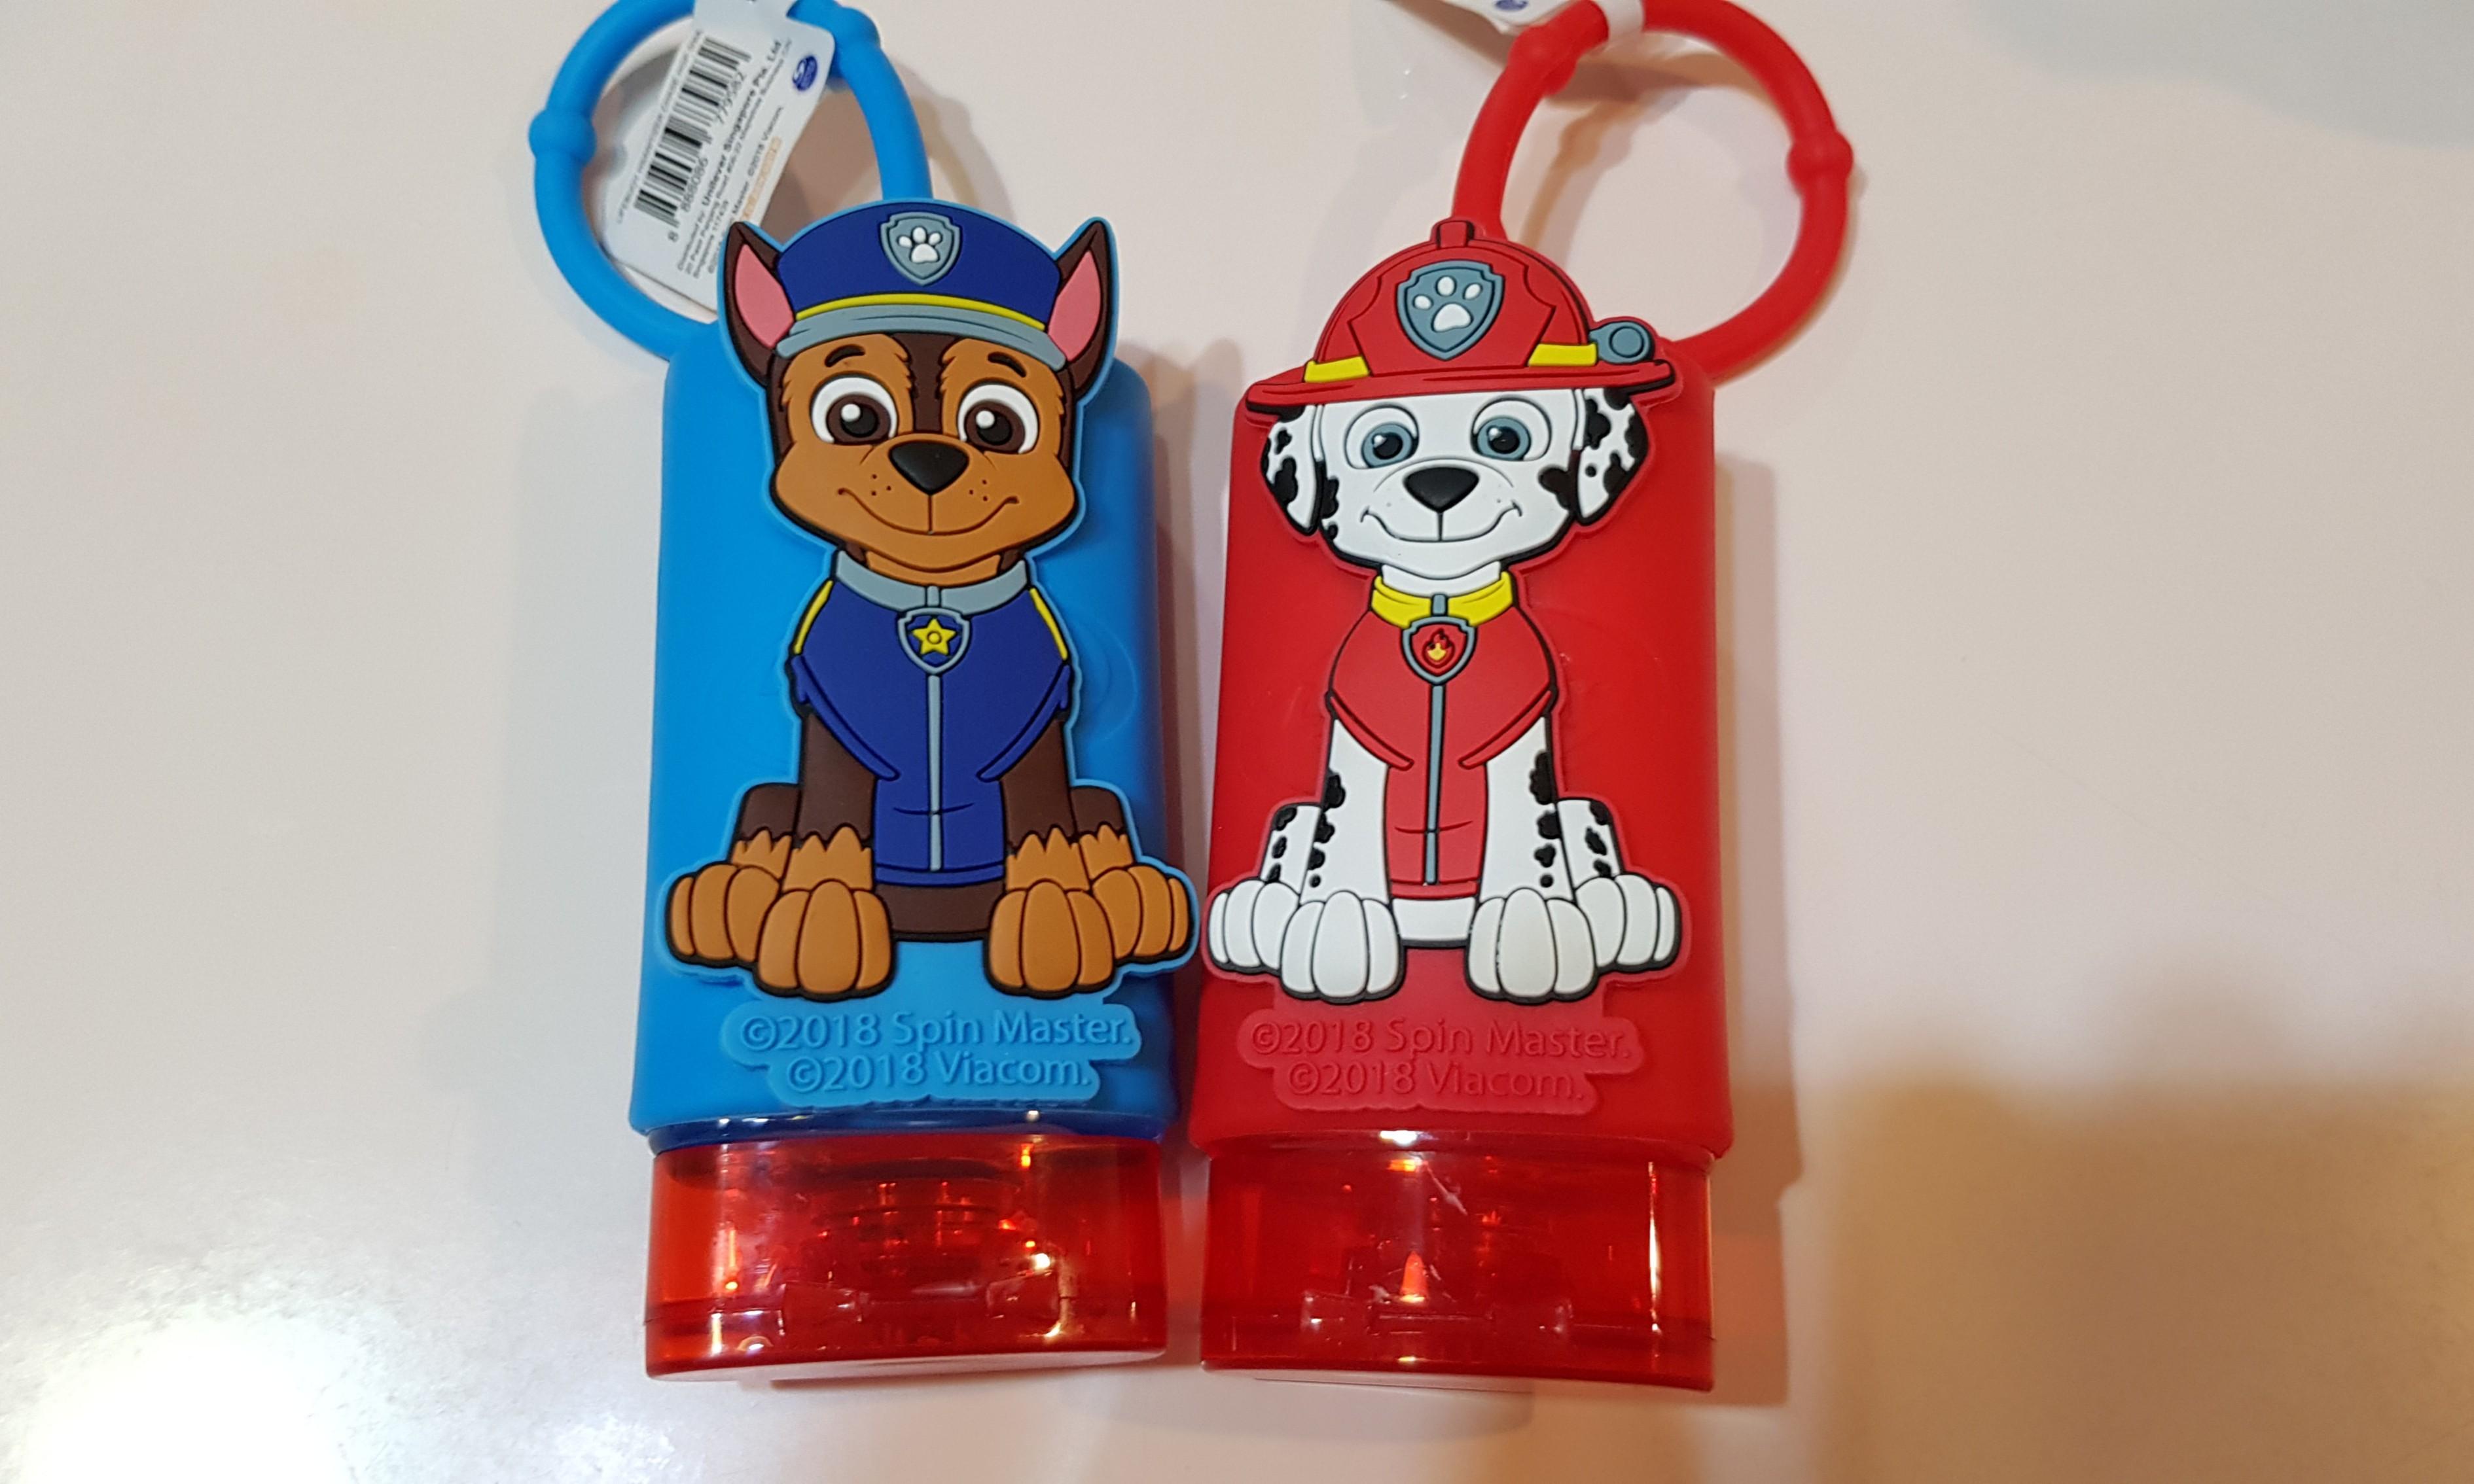 Sold][BN] Lifebuoy sanitizer with paw patrol cover, & Home Living, Bedding & Towels on Carousell